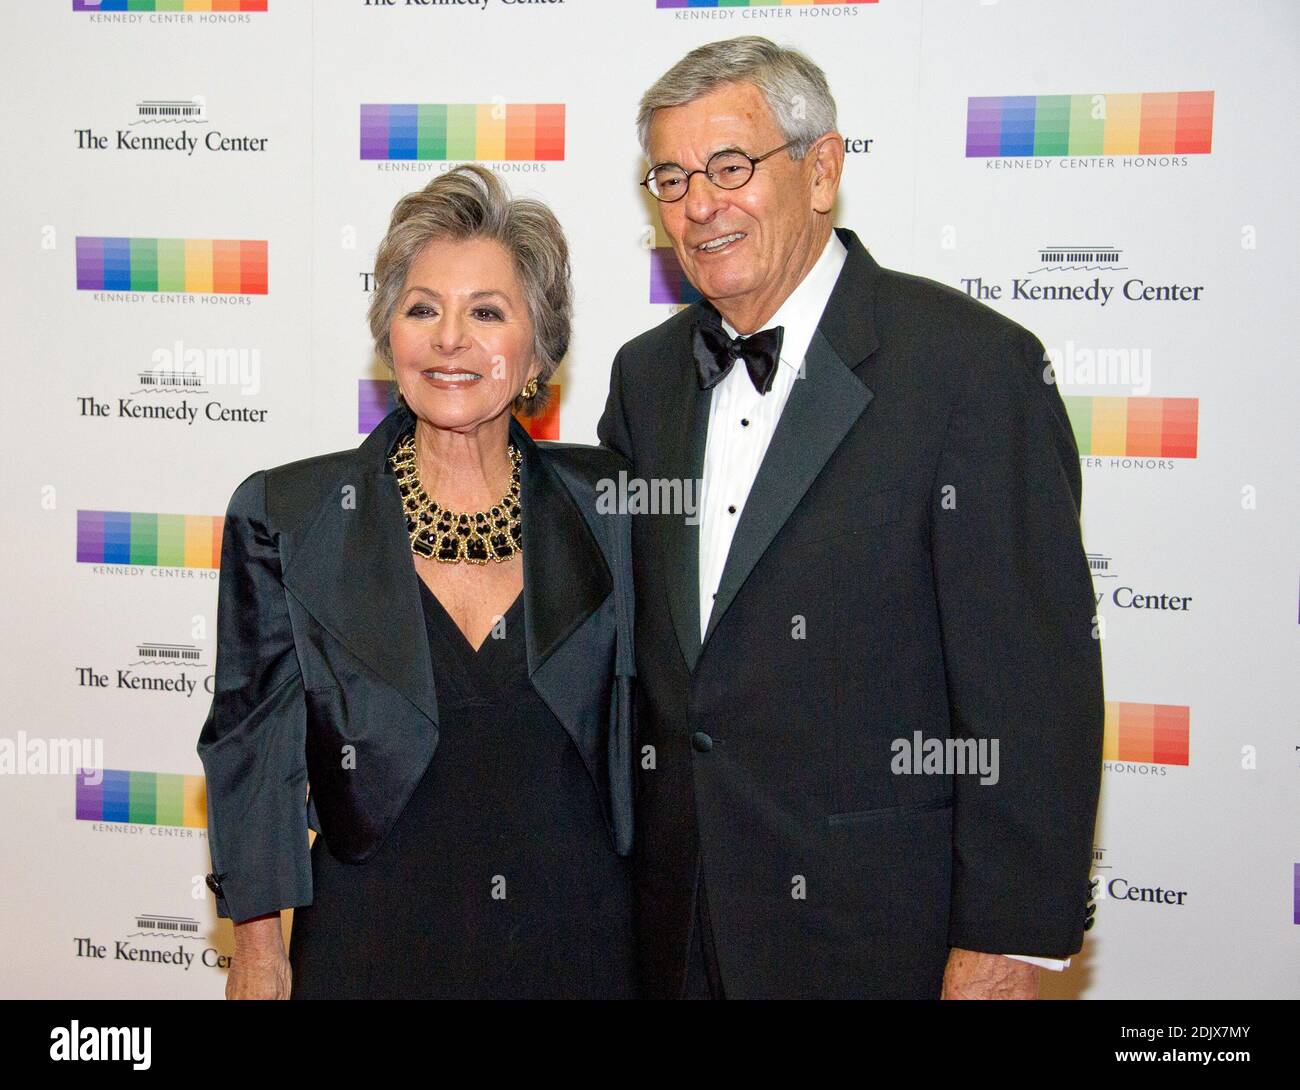 United States Senator Barbara Boxer (Democrat of California) and her husband, Stewart, arrive for the formal Artist's Dinner honoring the recipients of the 39th Annual Kennedy Center Honors hosted by United States Secretary of State John F. Kerry at the U.S. Department of State in Washington, D.C. on Saturday, December 3, 2016. The 2016 honorees are: Argentine pianist Martha Argerich; rock band the Eagles; screen and stage actor Al Pacino; gospel and blues singer Mavis Staples; and musician James Taylor. Photo by Ron Sachs /Pool via CNP/ABACAPRESS.COM Stock Photo